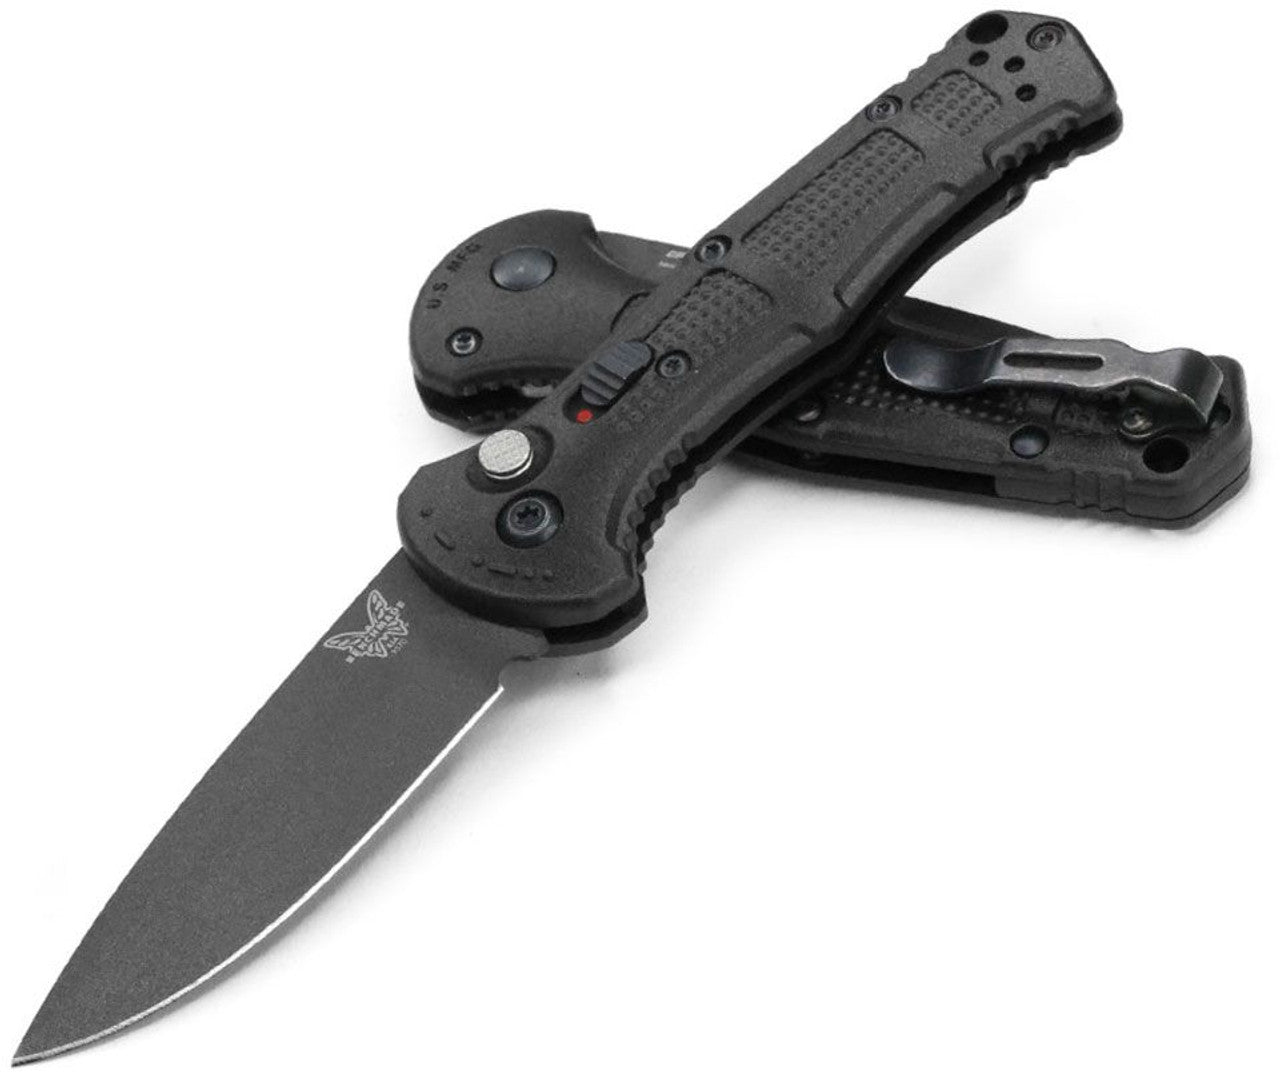 Benchmade Mini Claymore - Automatic - CPM-D2 Blade - Black Grivory Handle - 9570BK